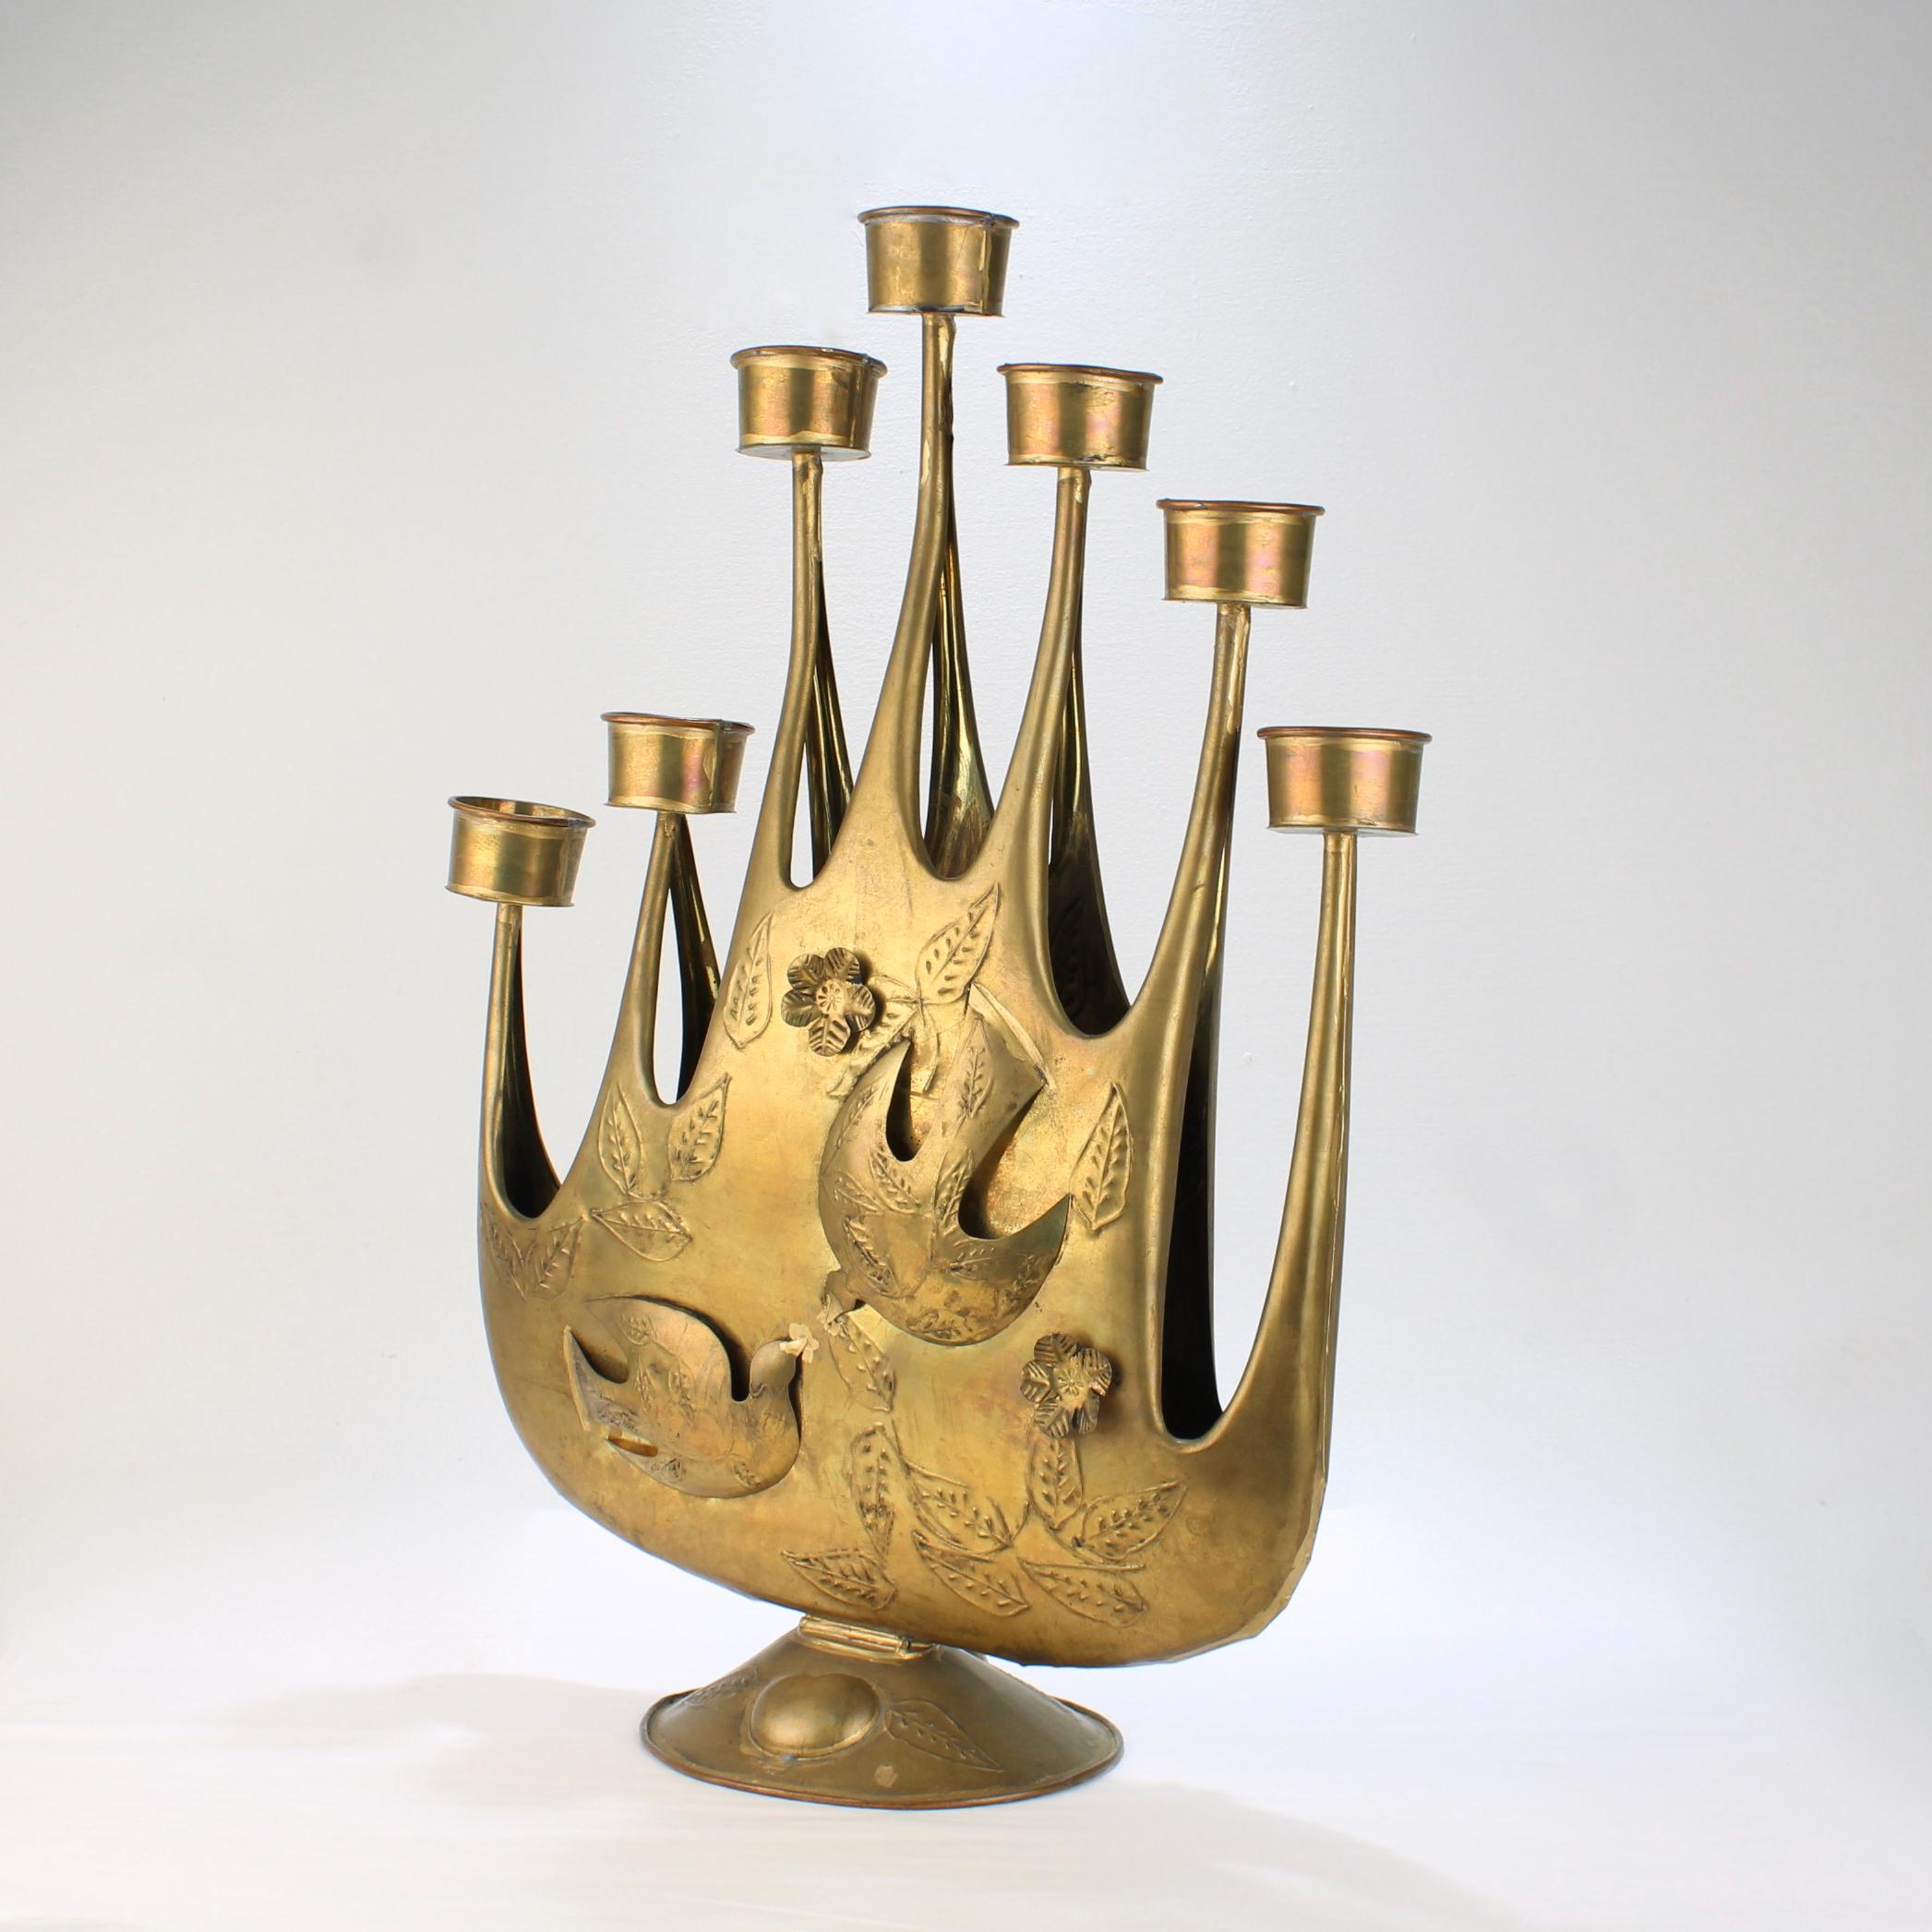 A wonderful, large-scale Mid-Century Mexican tin candelabrum or candle holder by Gene Bryon.

Gene Byron was a Canadian artist, who emigrated to Mexico and rose to prominence for her design and metalwork in the Mid-20th century. After her death,